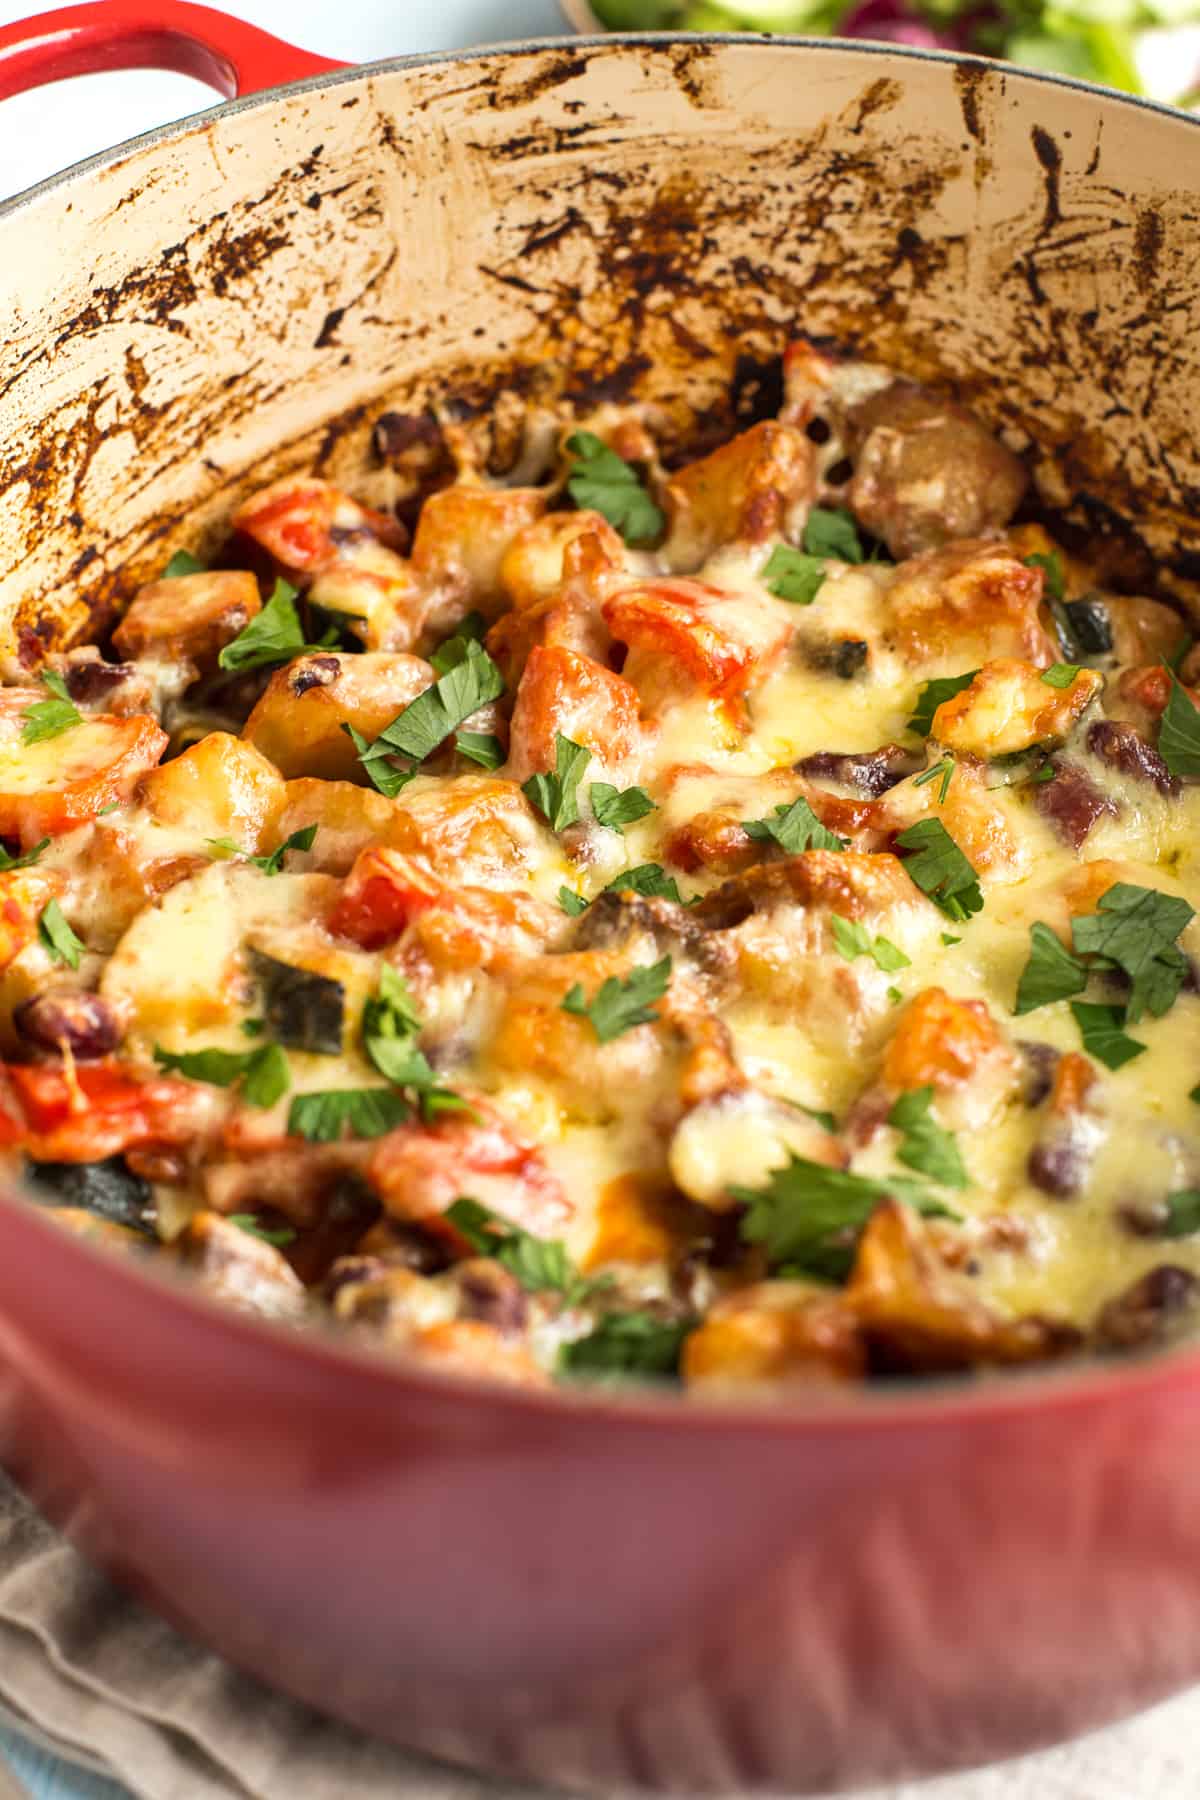 Cheesy Mexican bean and potato bake in a large casserole dish topped with cilantro.